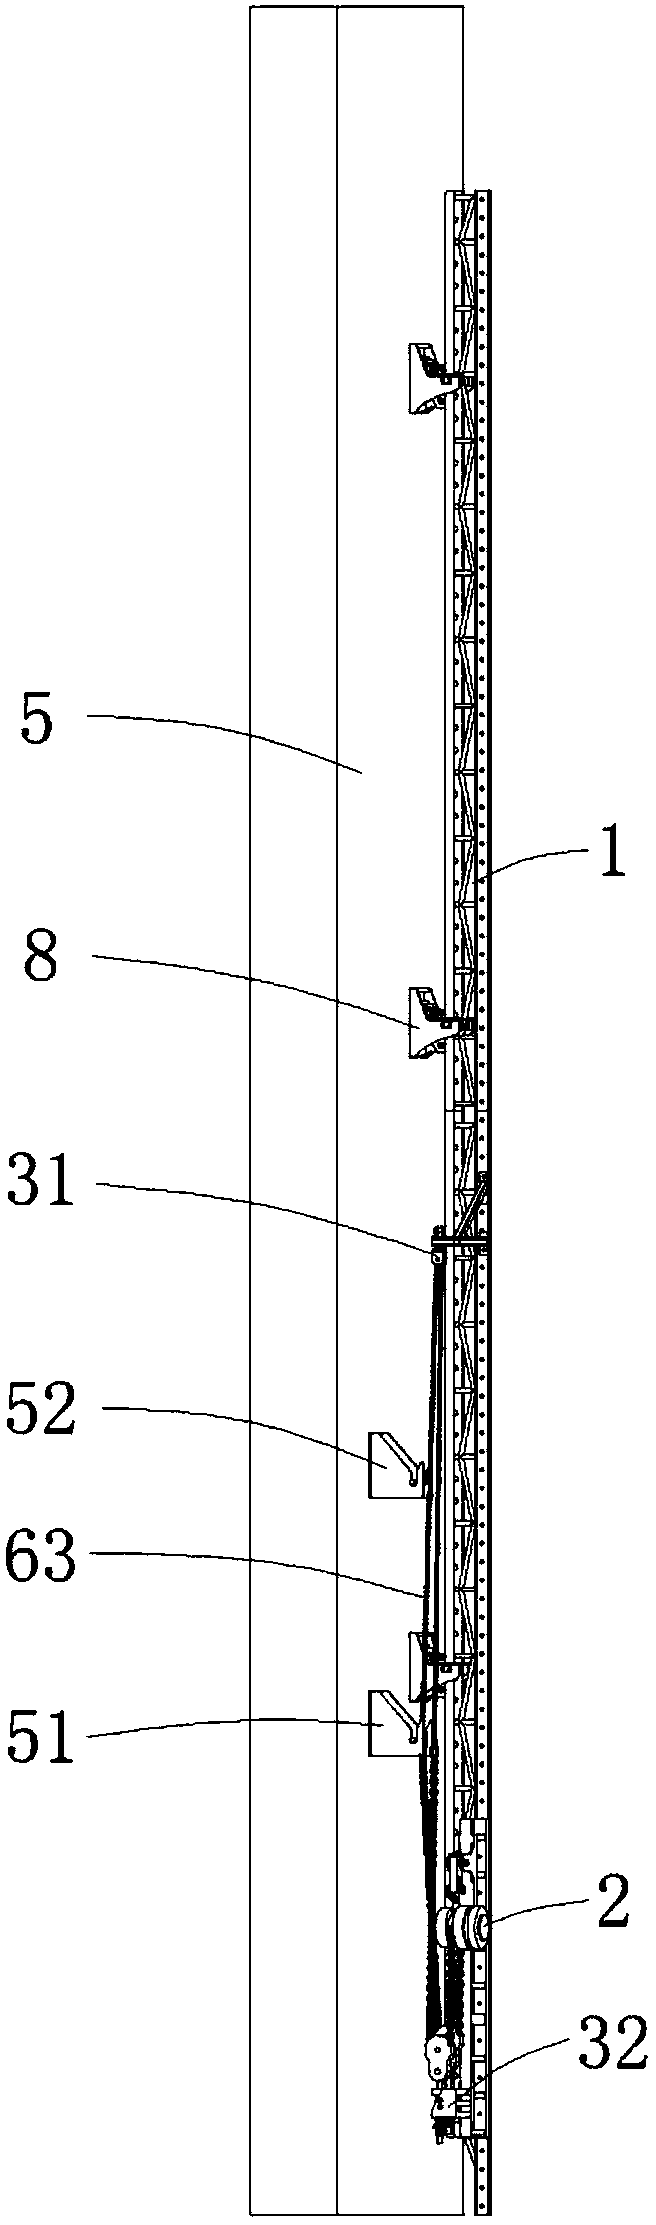 All-steel adhesion type lifting scaffolding positive and negative rotation simultaneous lifting system and method